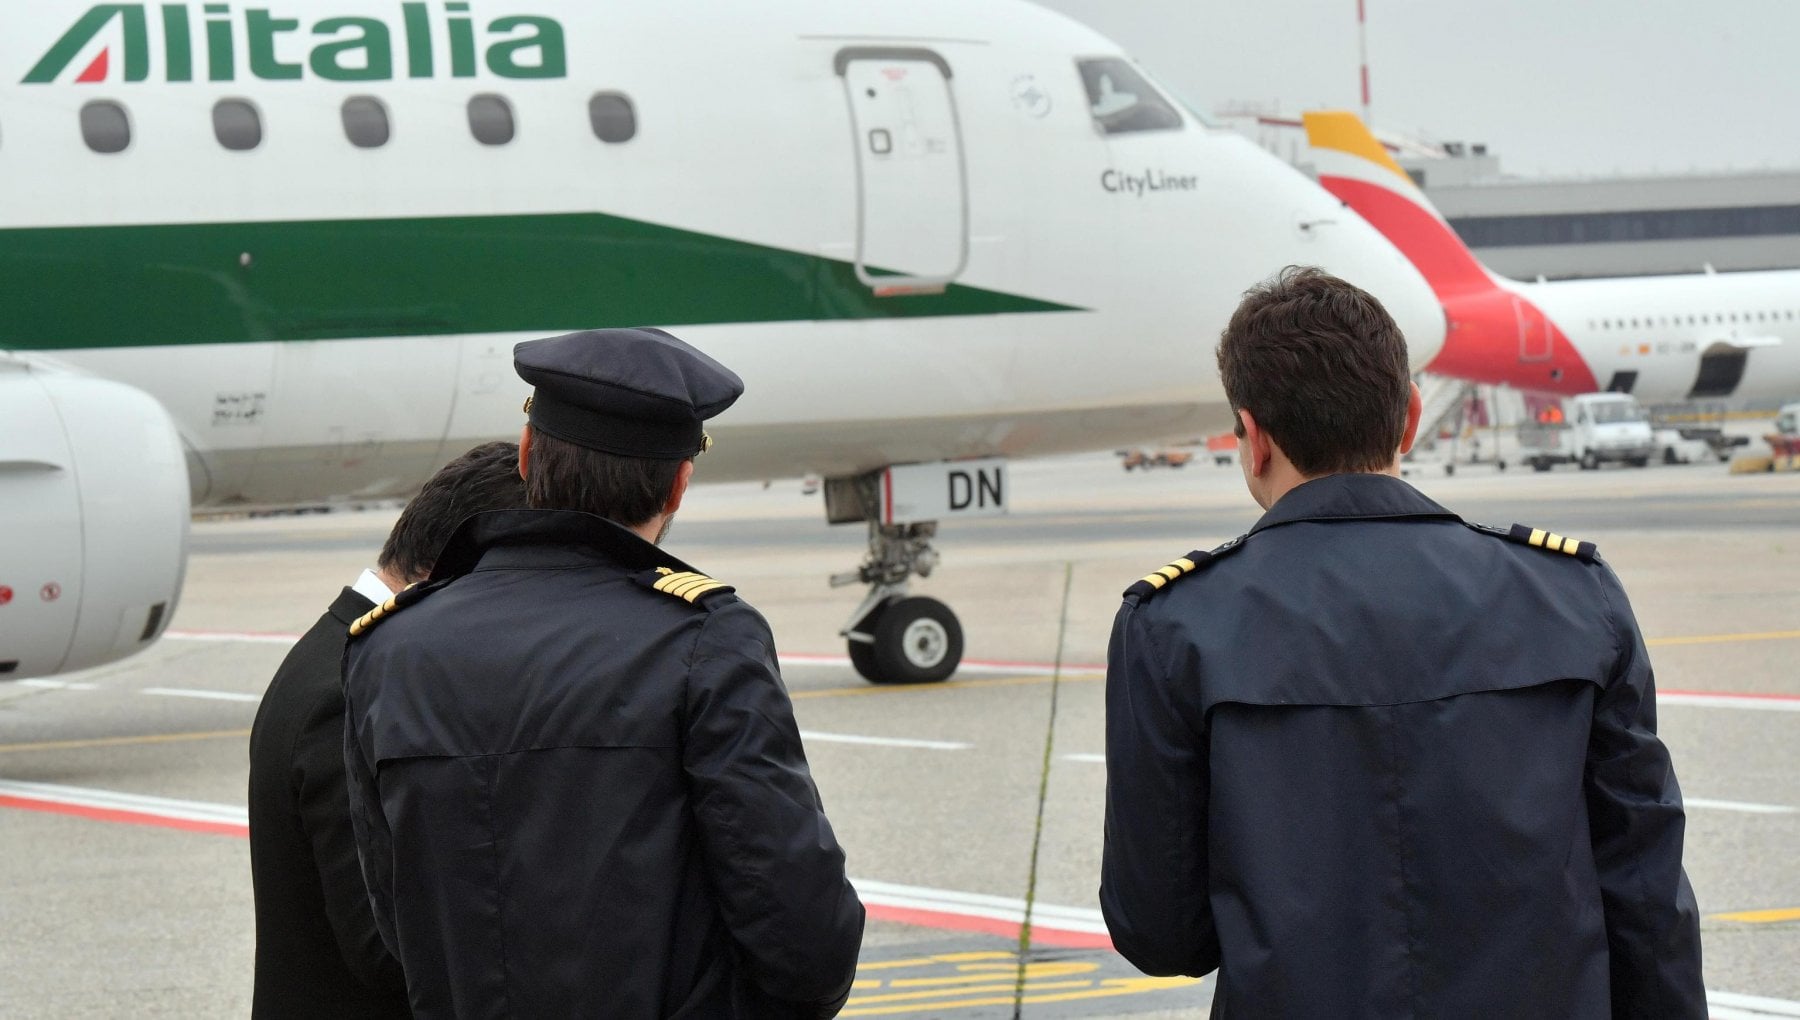 The reorganized Alitalia would like to resume operations